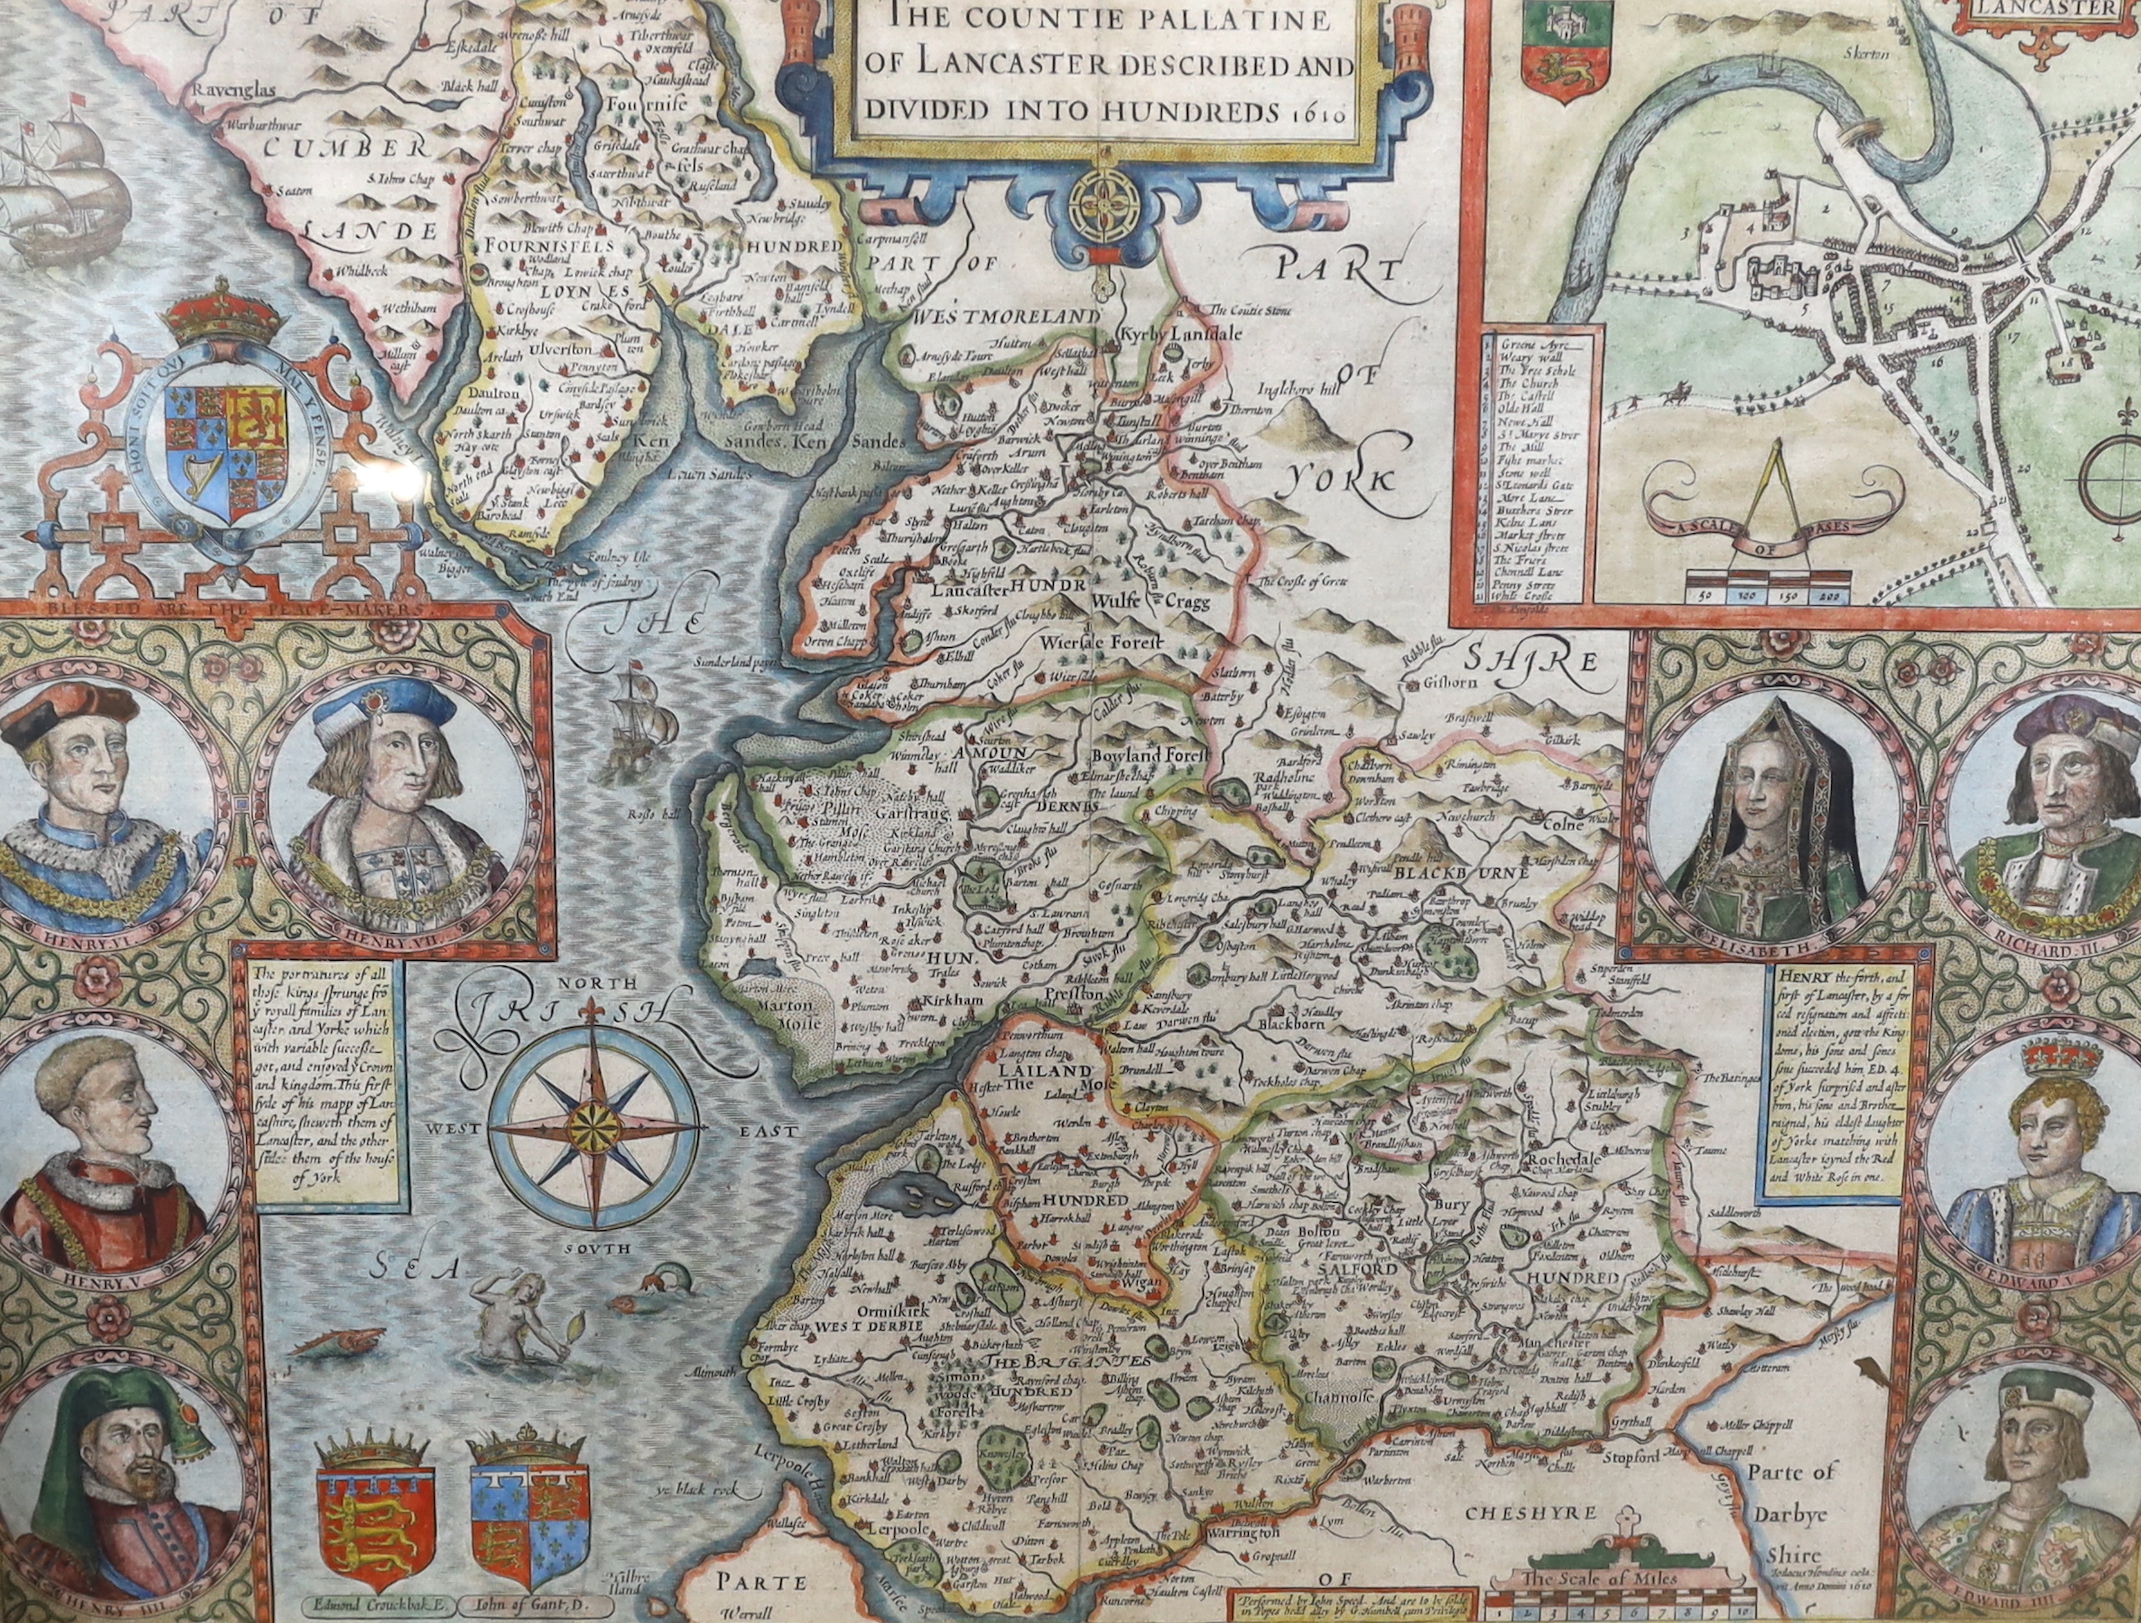 After John Speed (1552-1629), hand-coloured engraved map, ‘The Countie Palletine of Lancaster